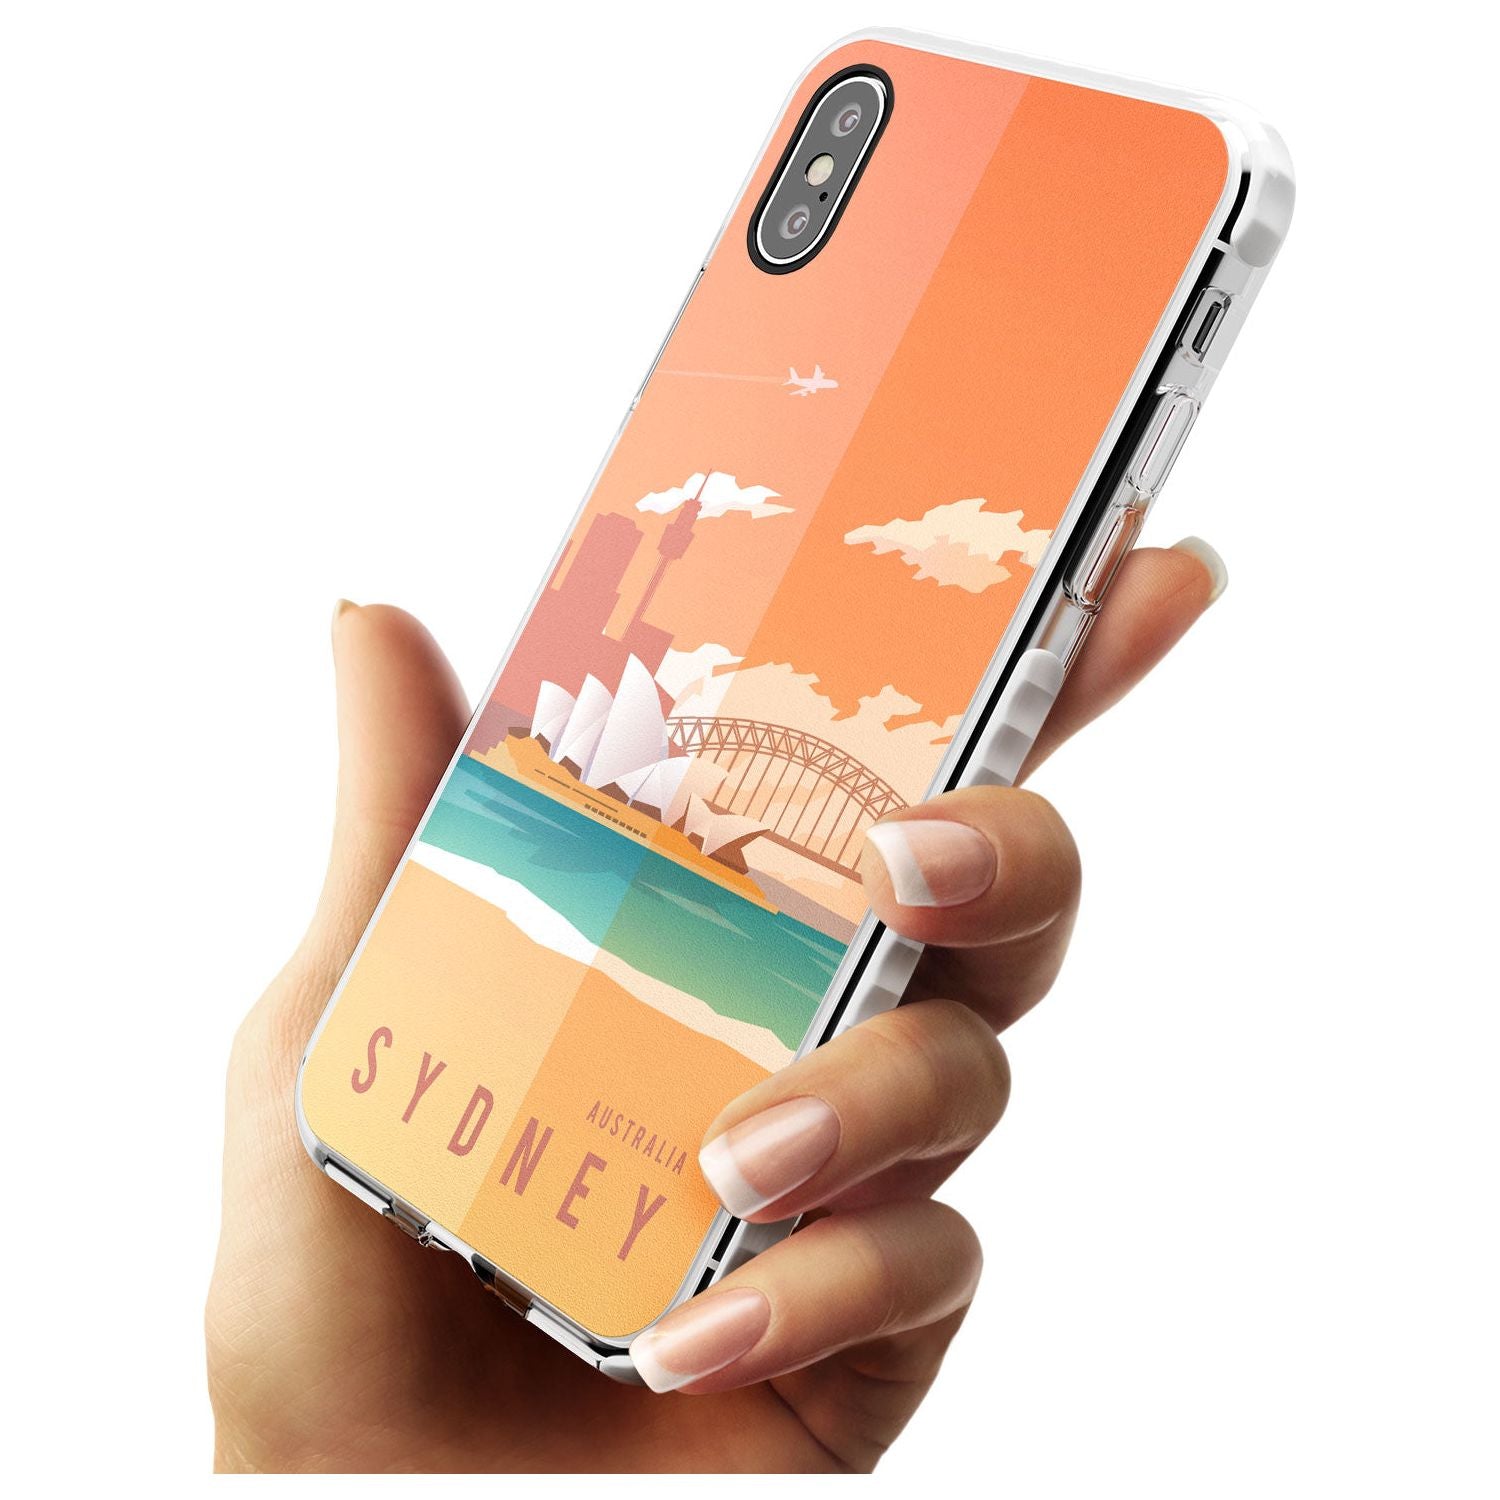 Vintage Travel Poster Sydney Impact Phone Case for iPhone X XS Max XR